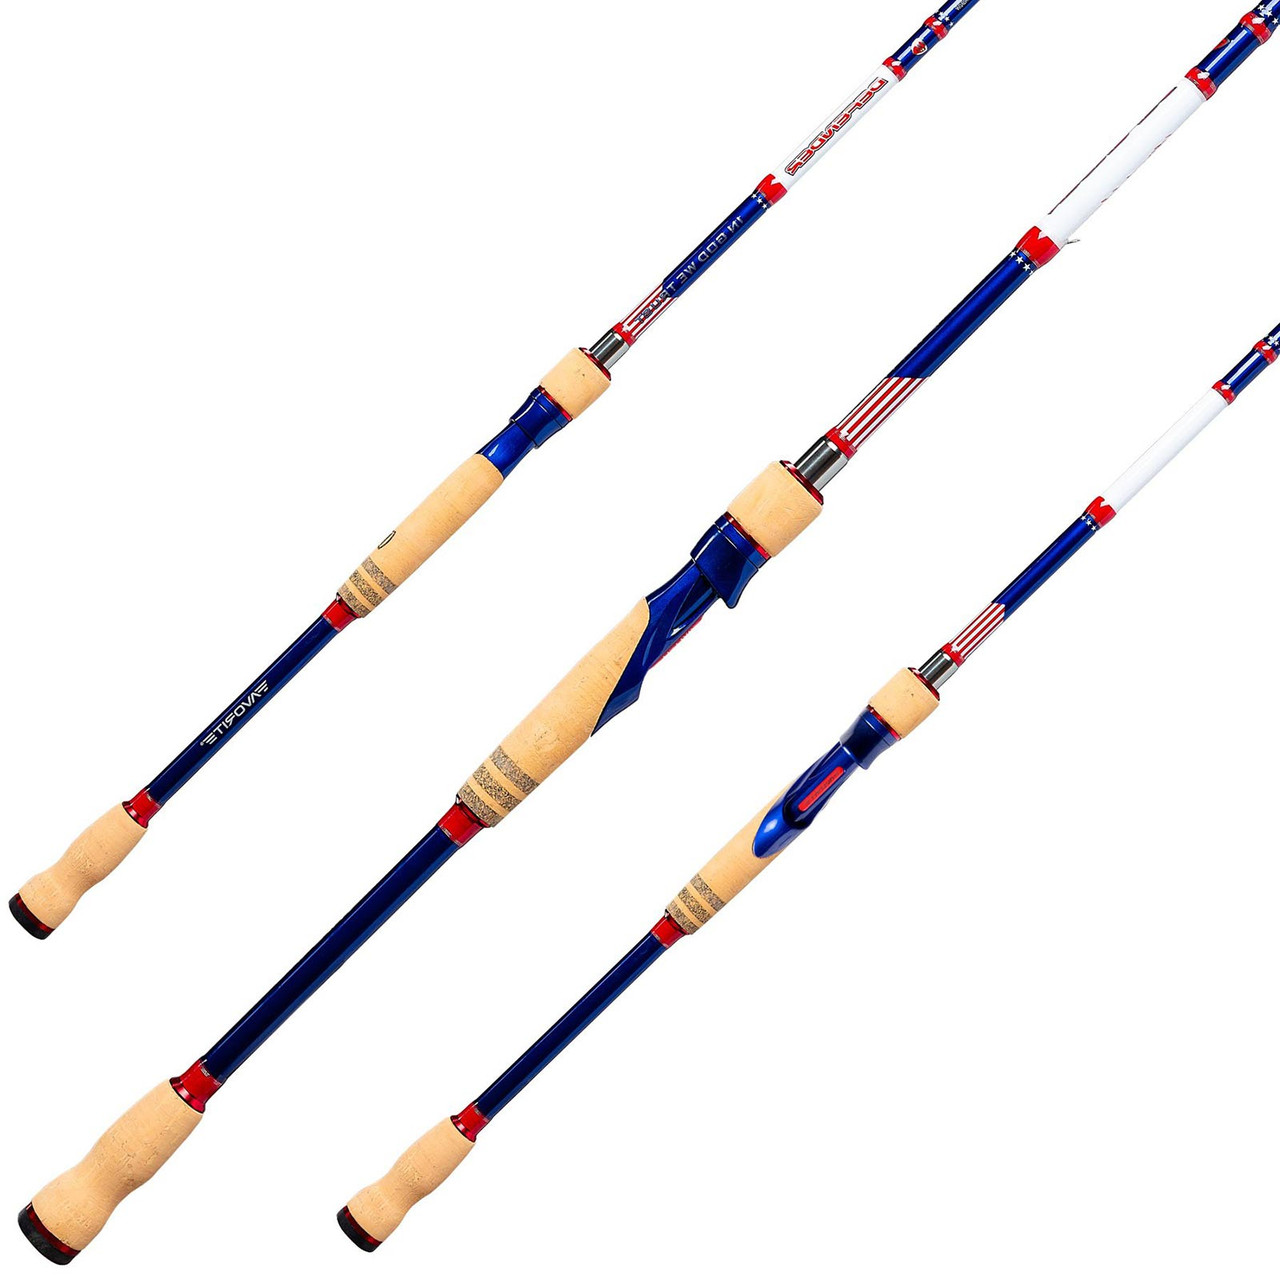 Many Spinning Rods Fishing Rods Colorful Stock Photo 2215816277